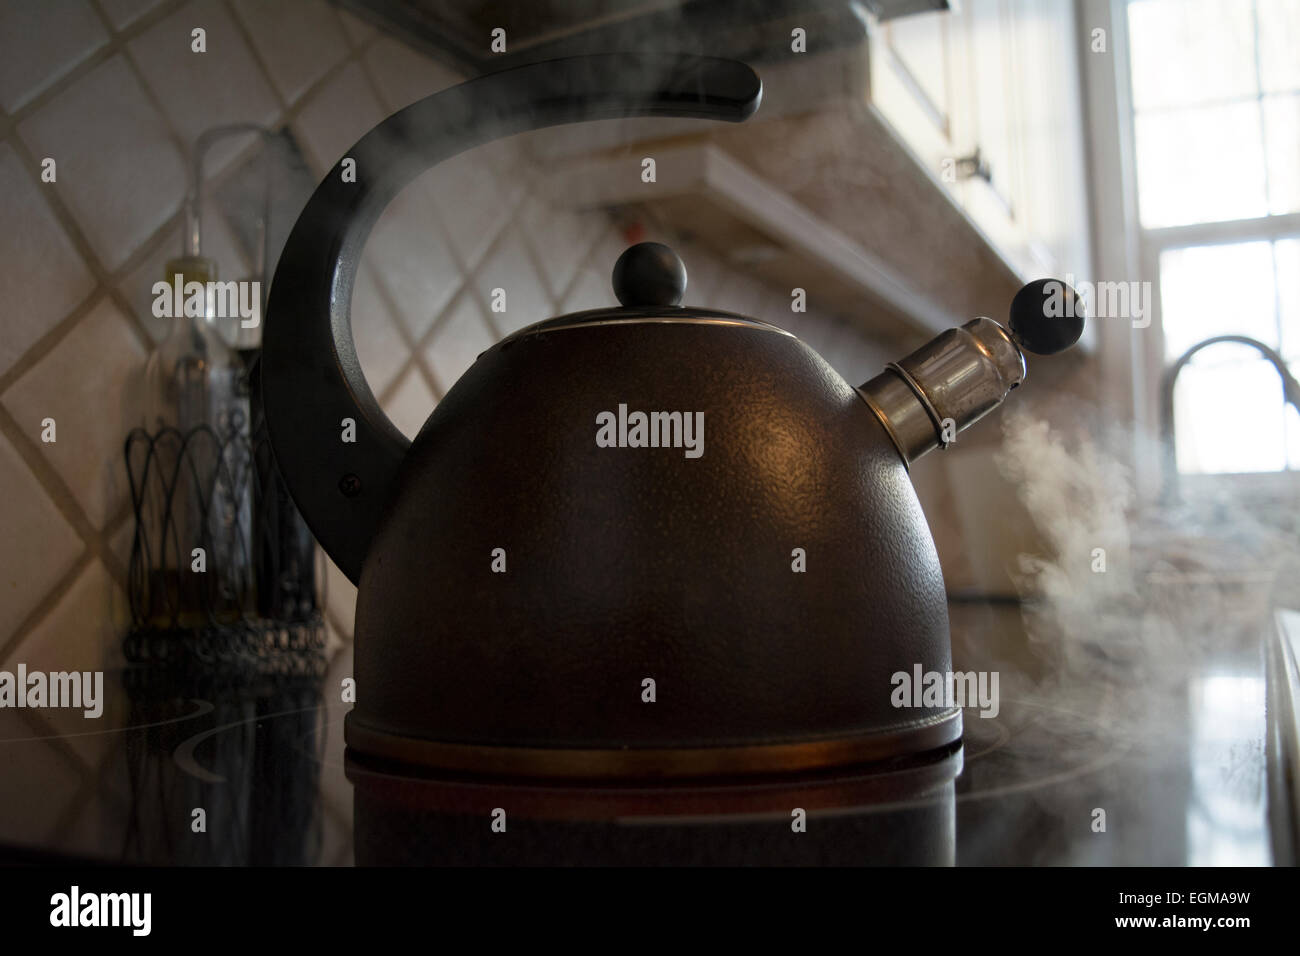 A kettle on top of an element at its boiling point with steam coming out of it Stock Photo